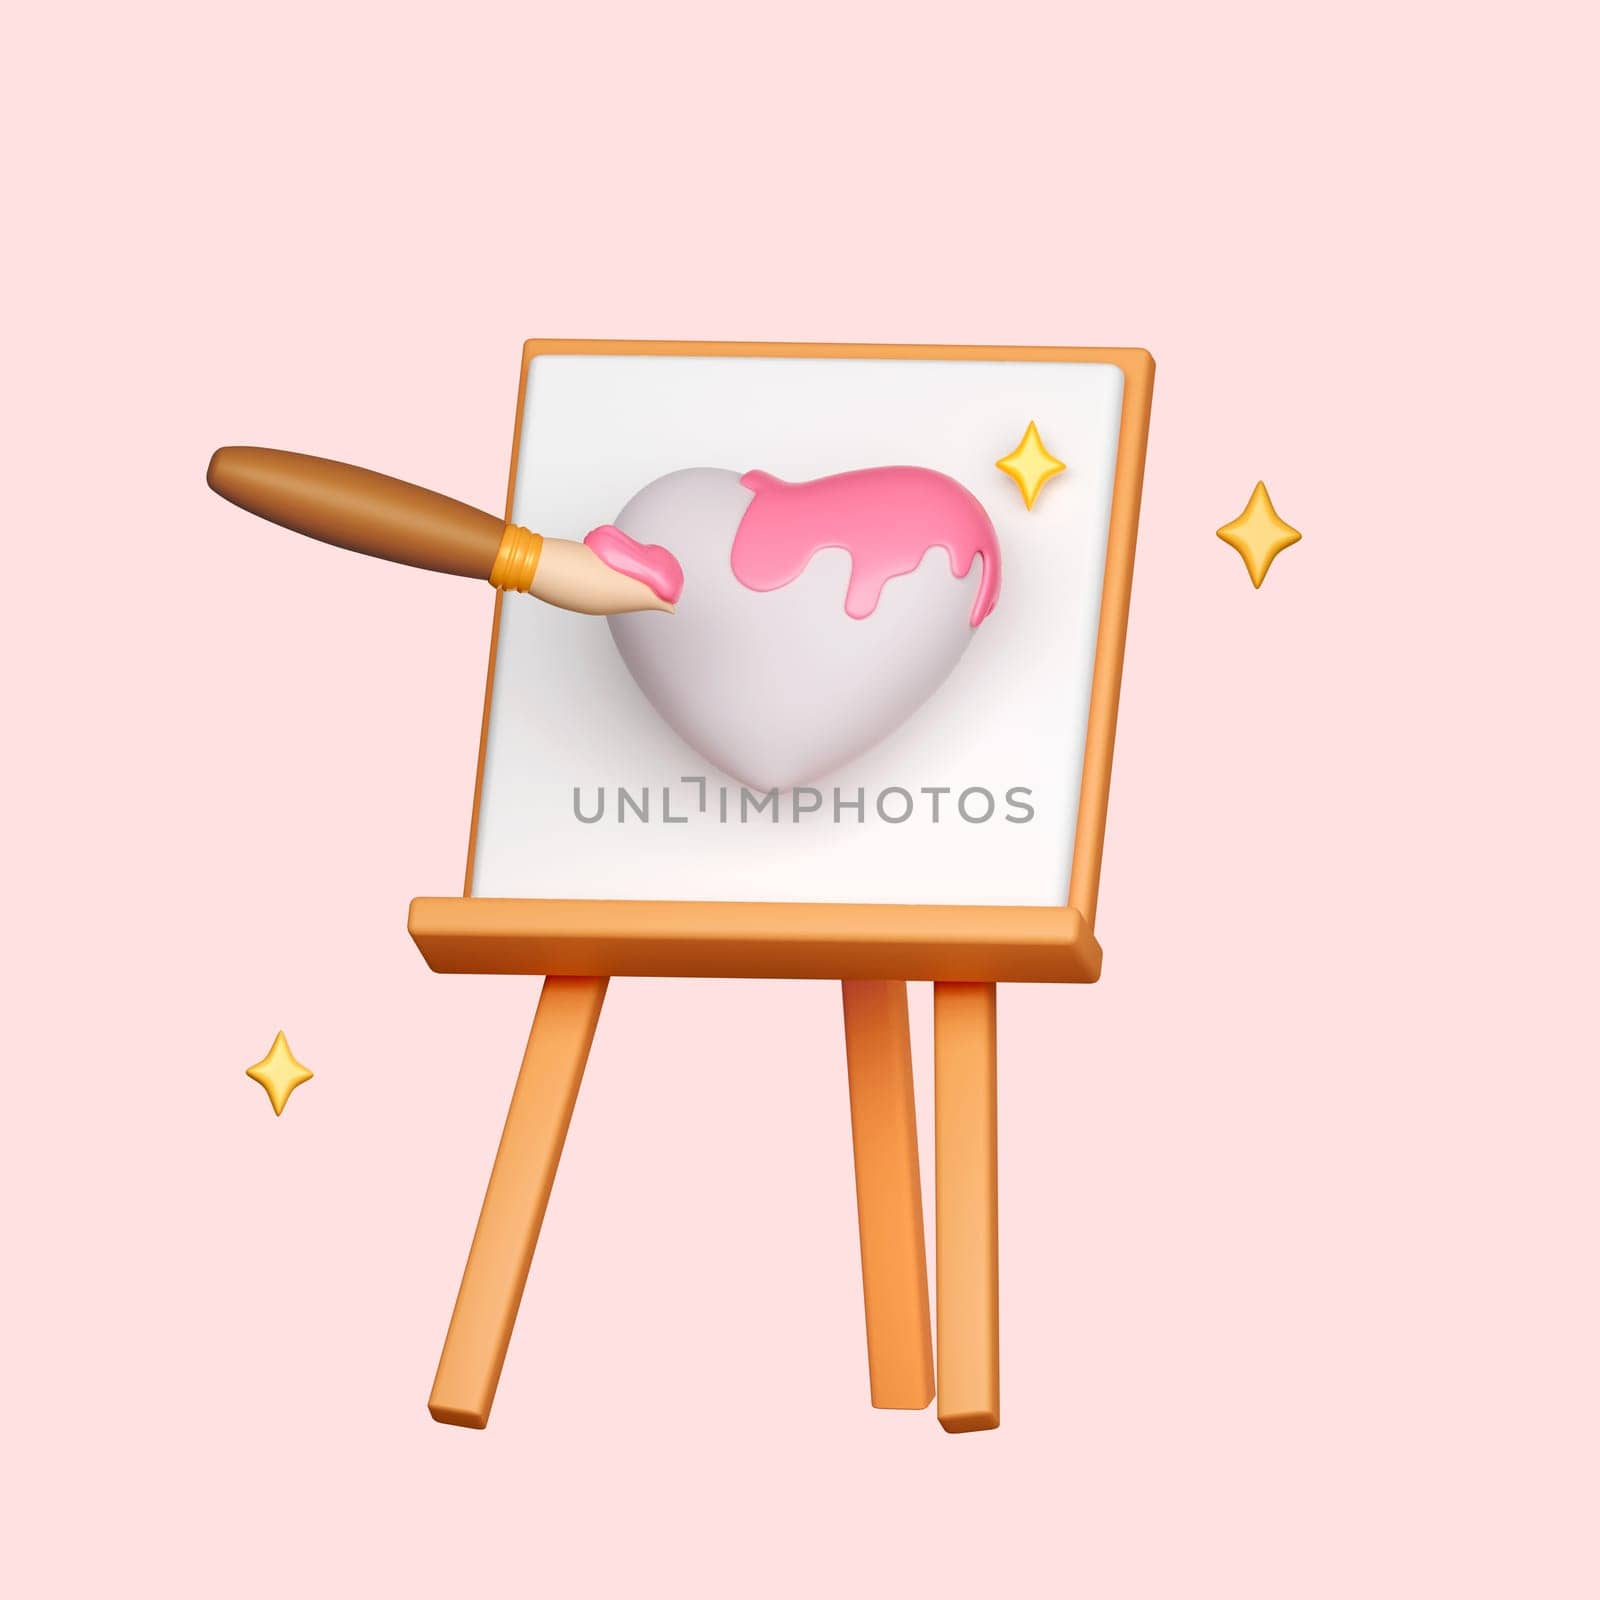 Artist paint brushes drawing heart isolate on pink background. icon clipping path. 3d render Illustration by meepiangraphic